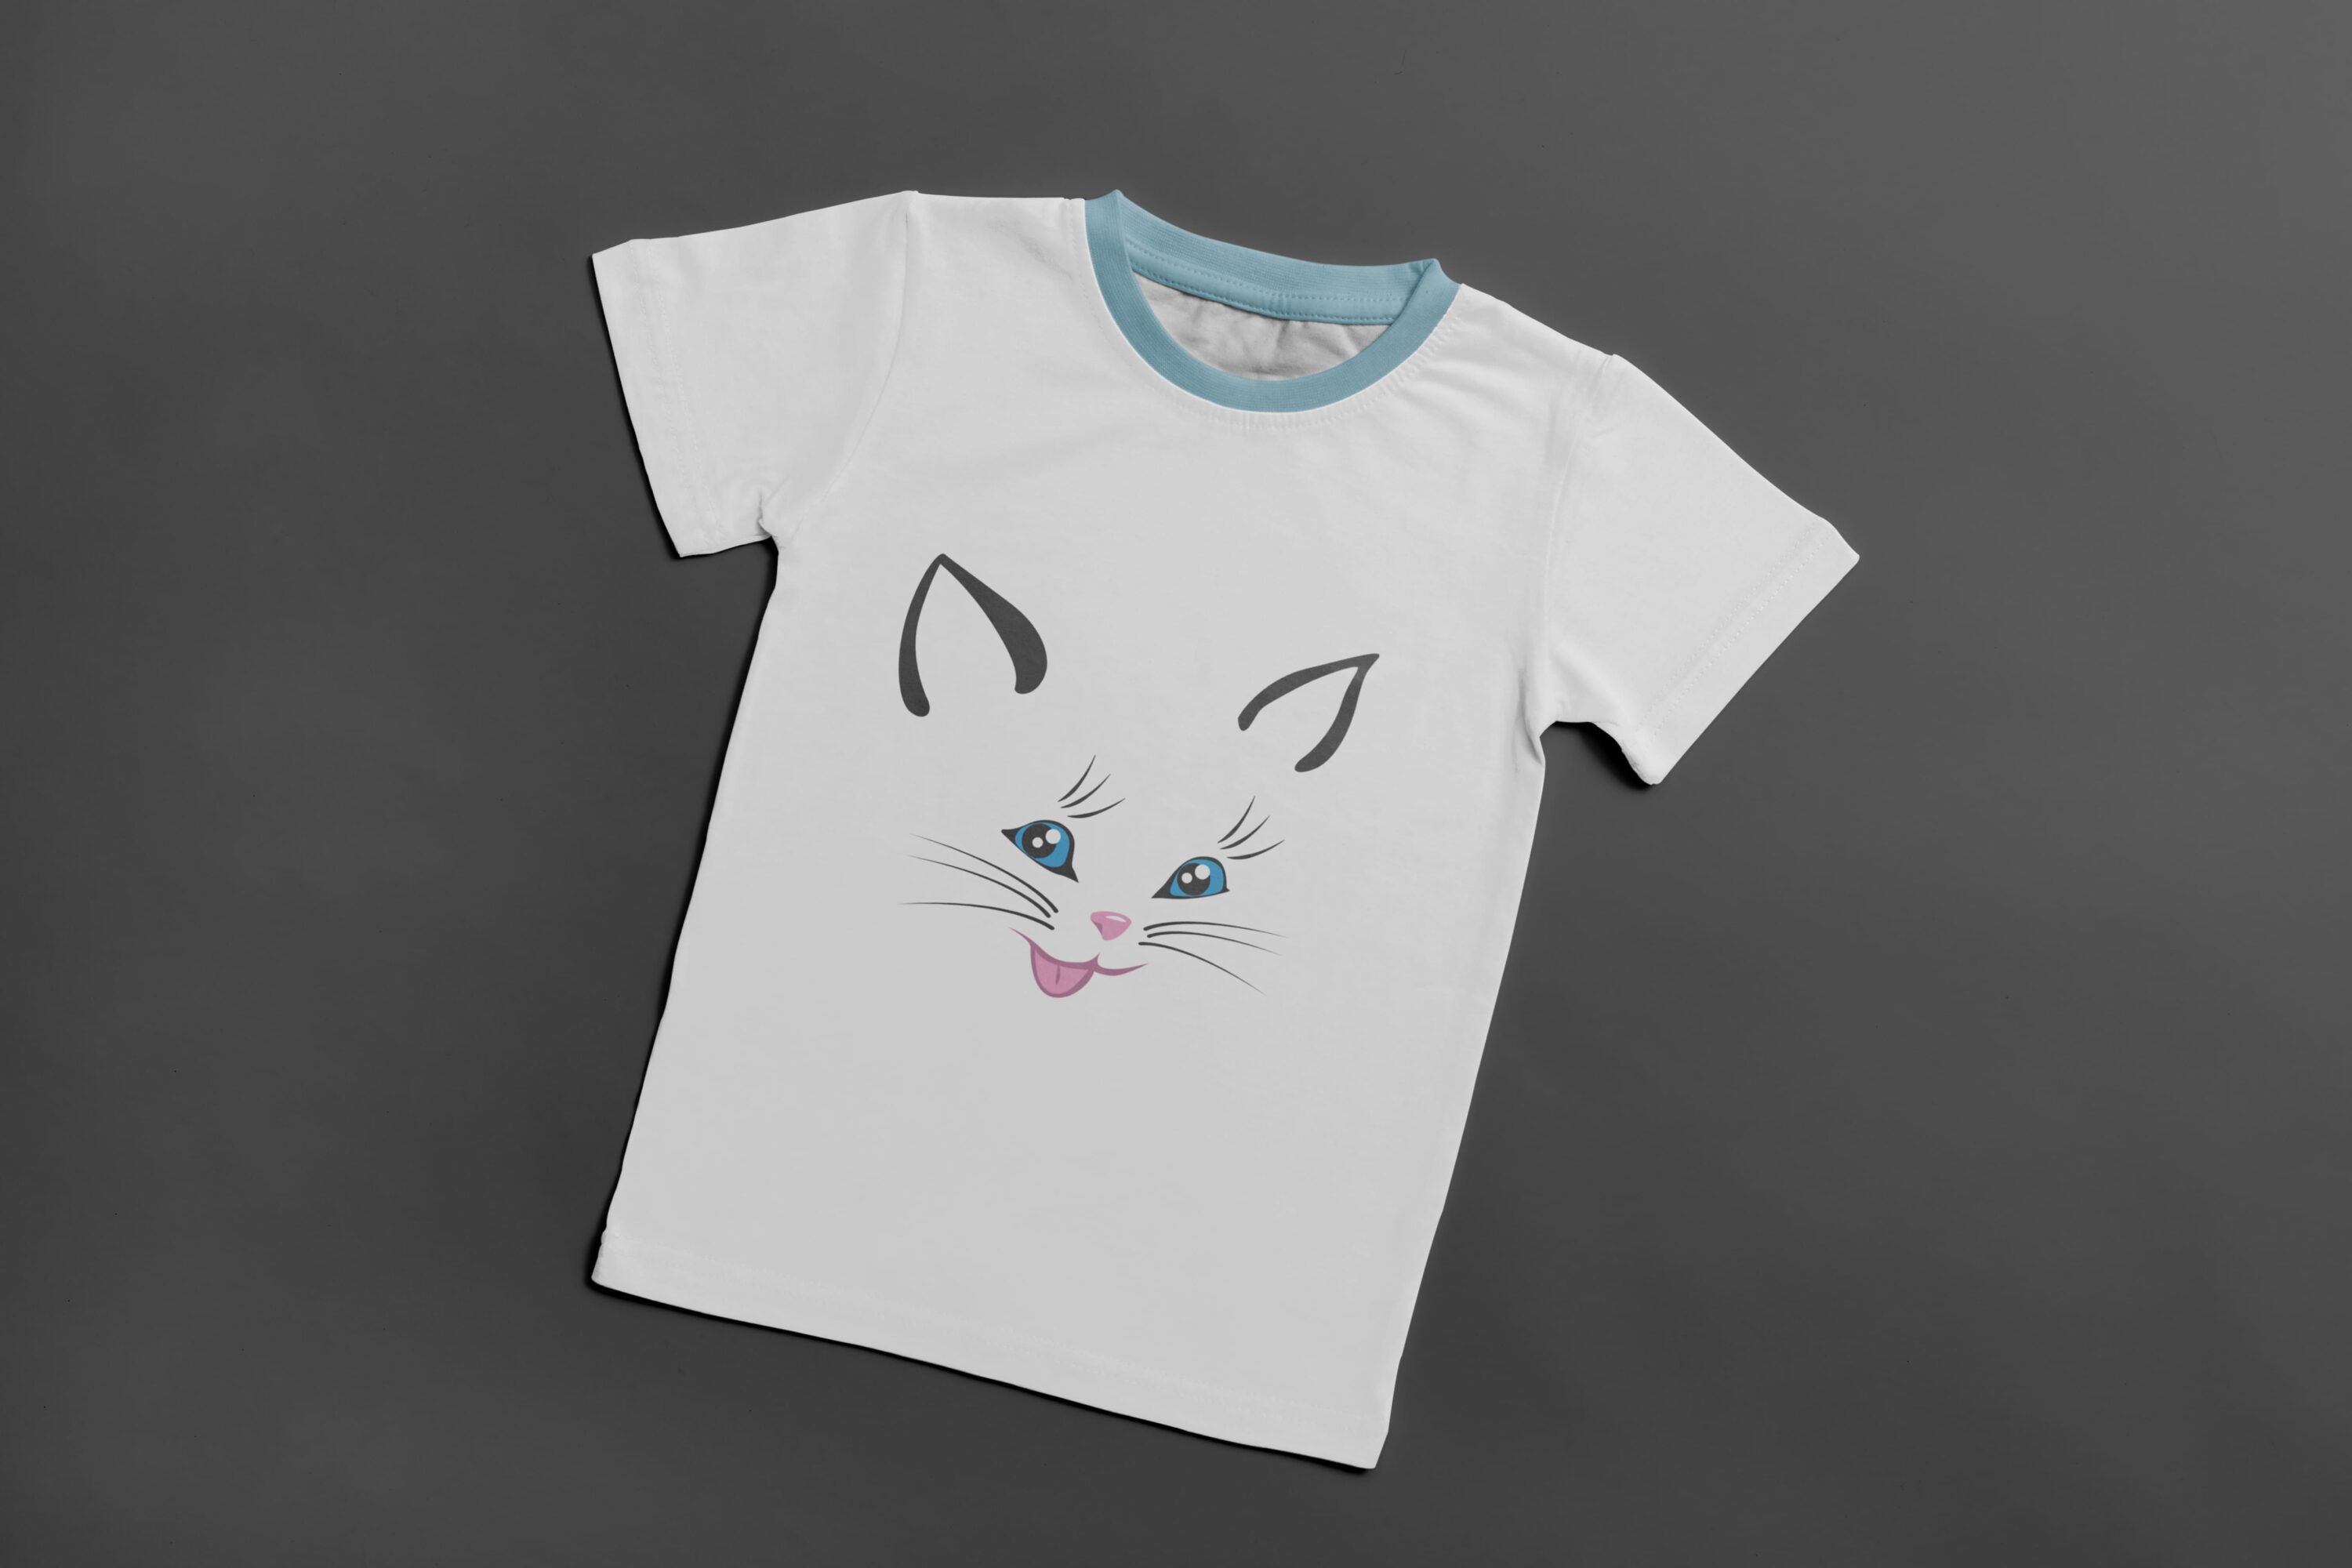 A white t-shirt with a light blue collar and the face of a smiling cat with blue eyes.